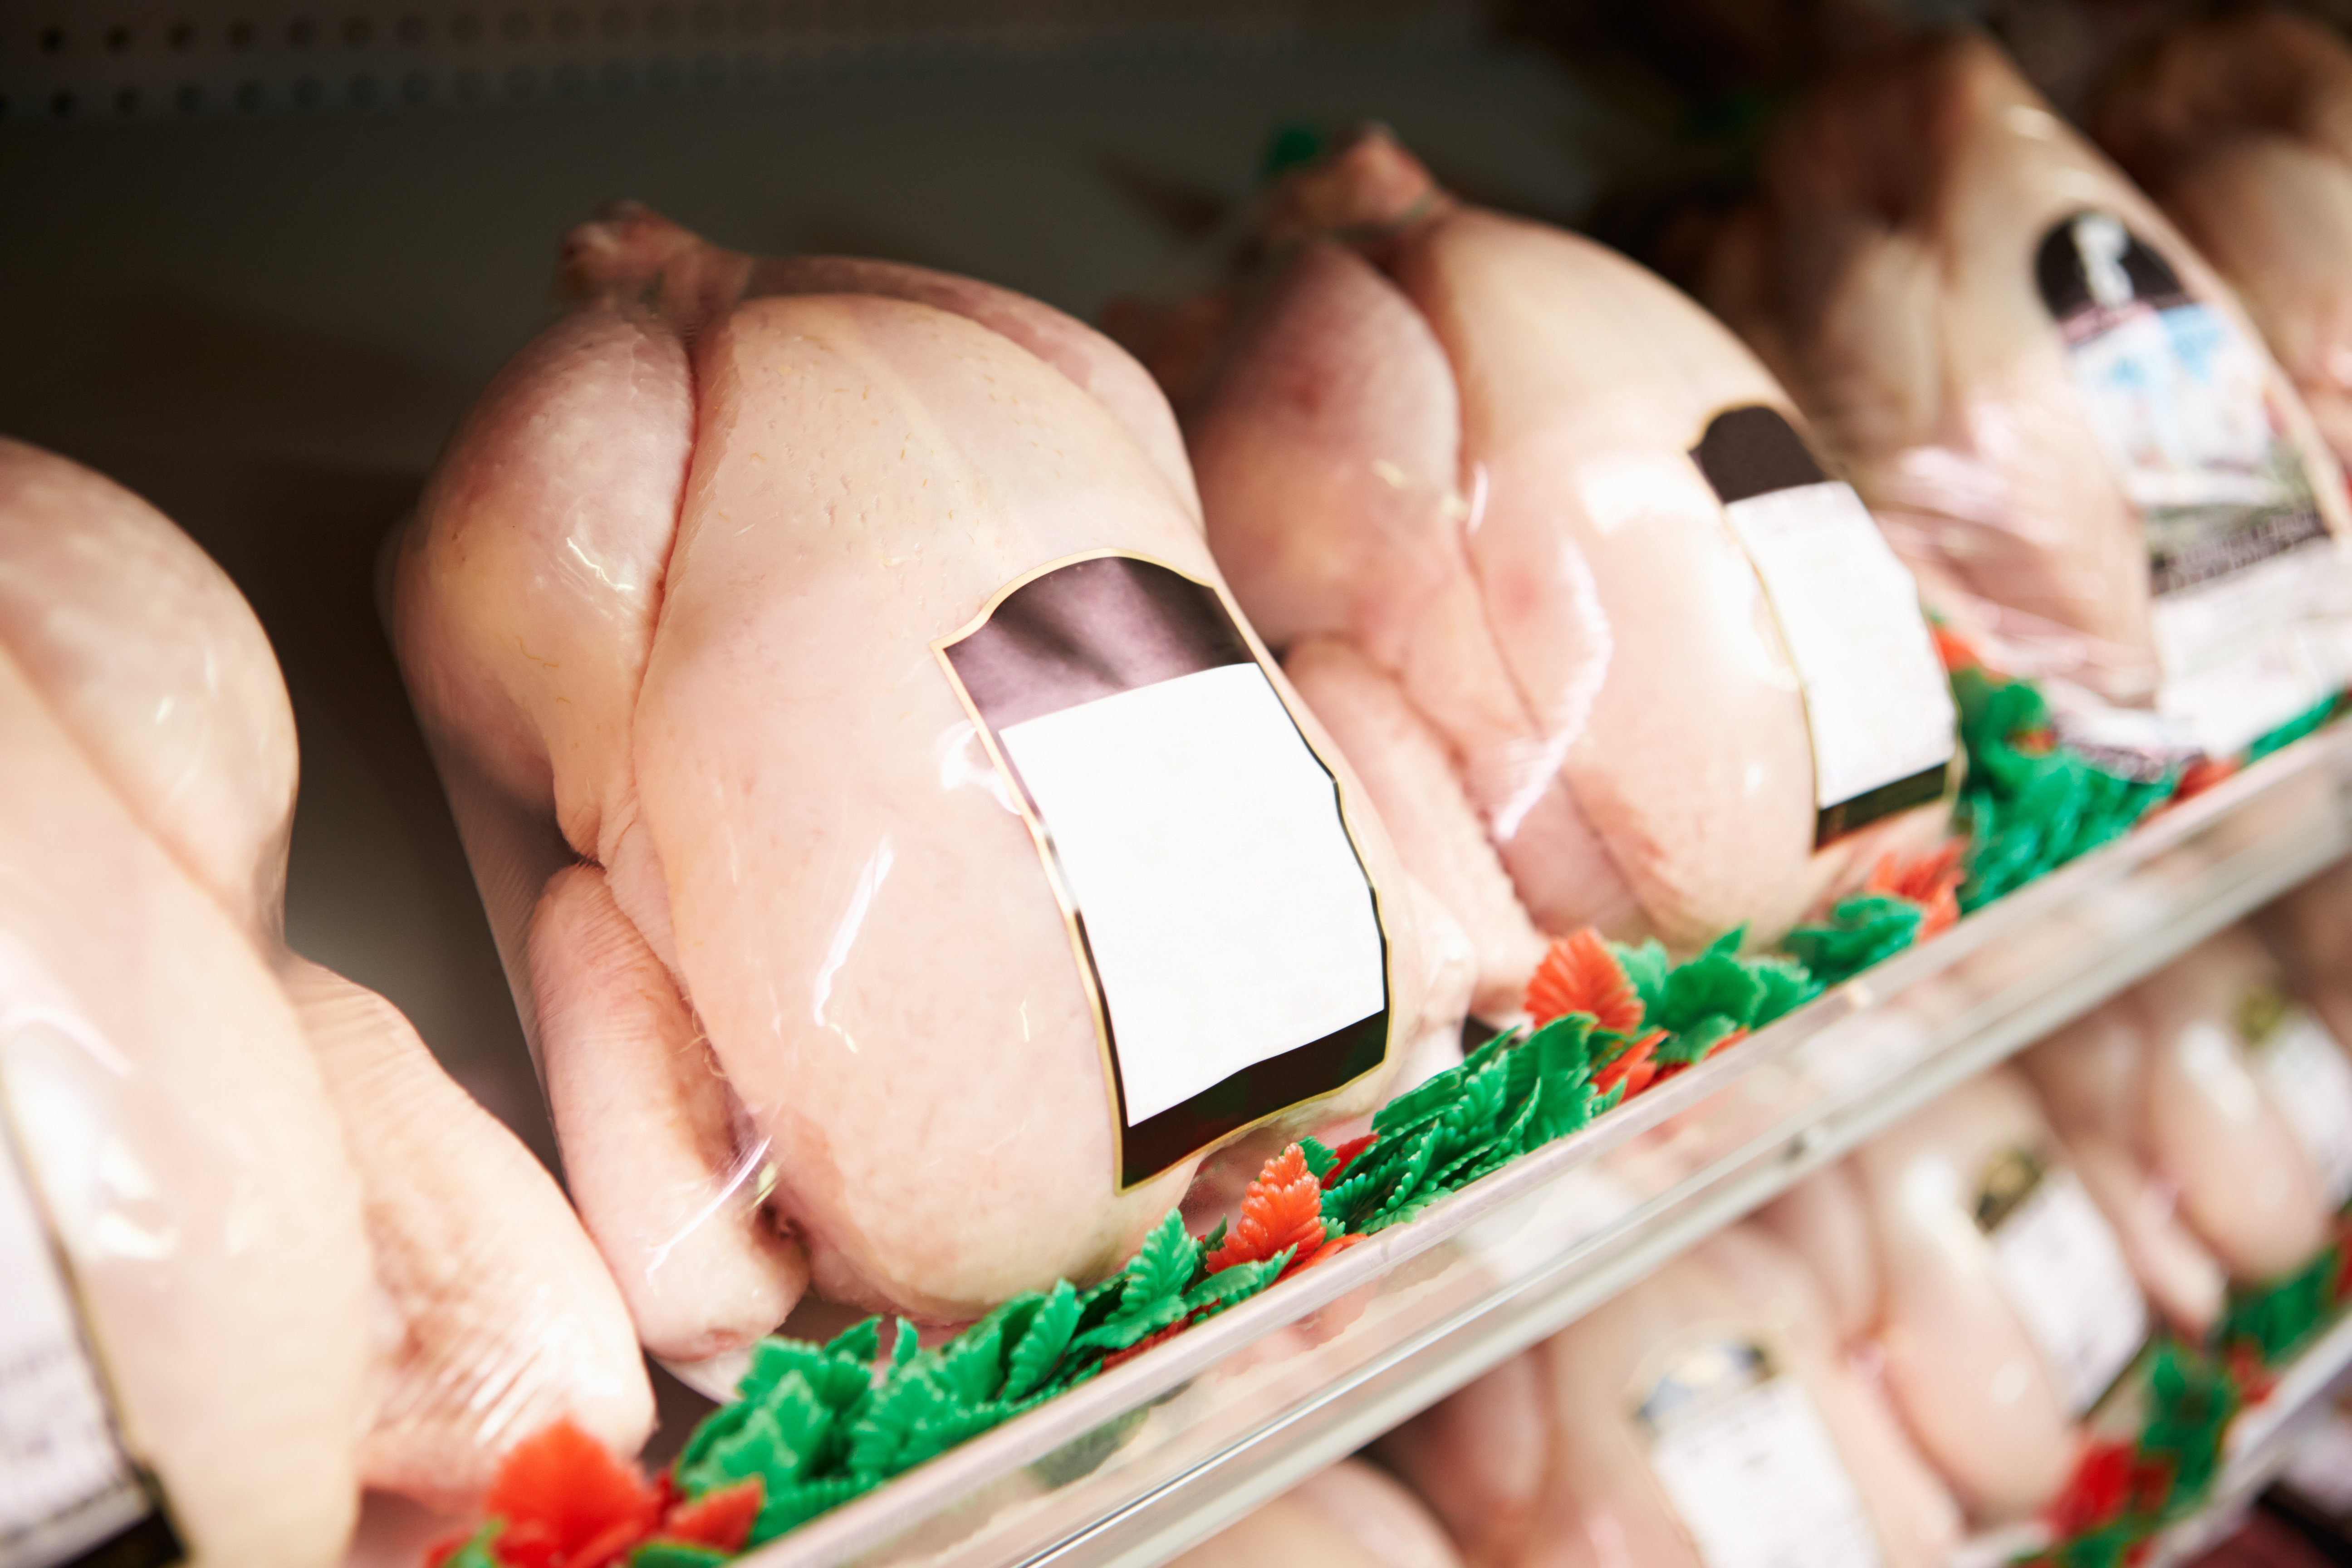 Whole chickens in a refrigerated grocery case